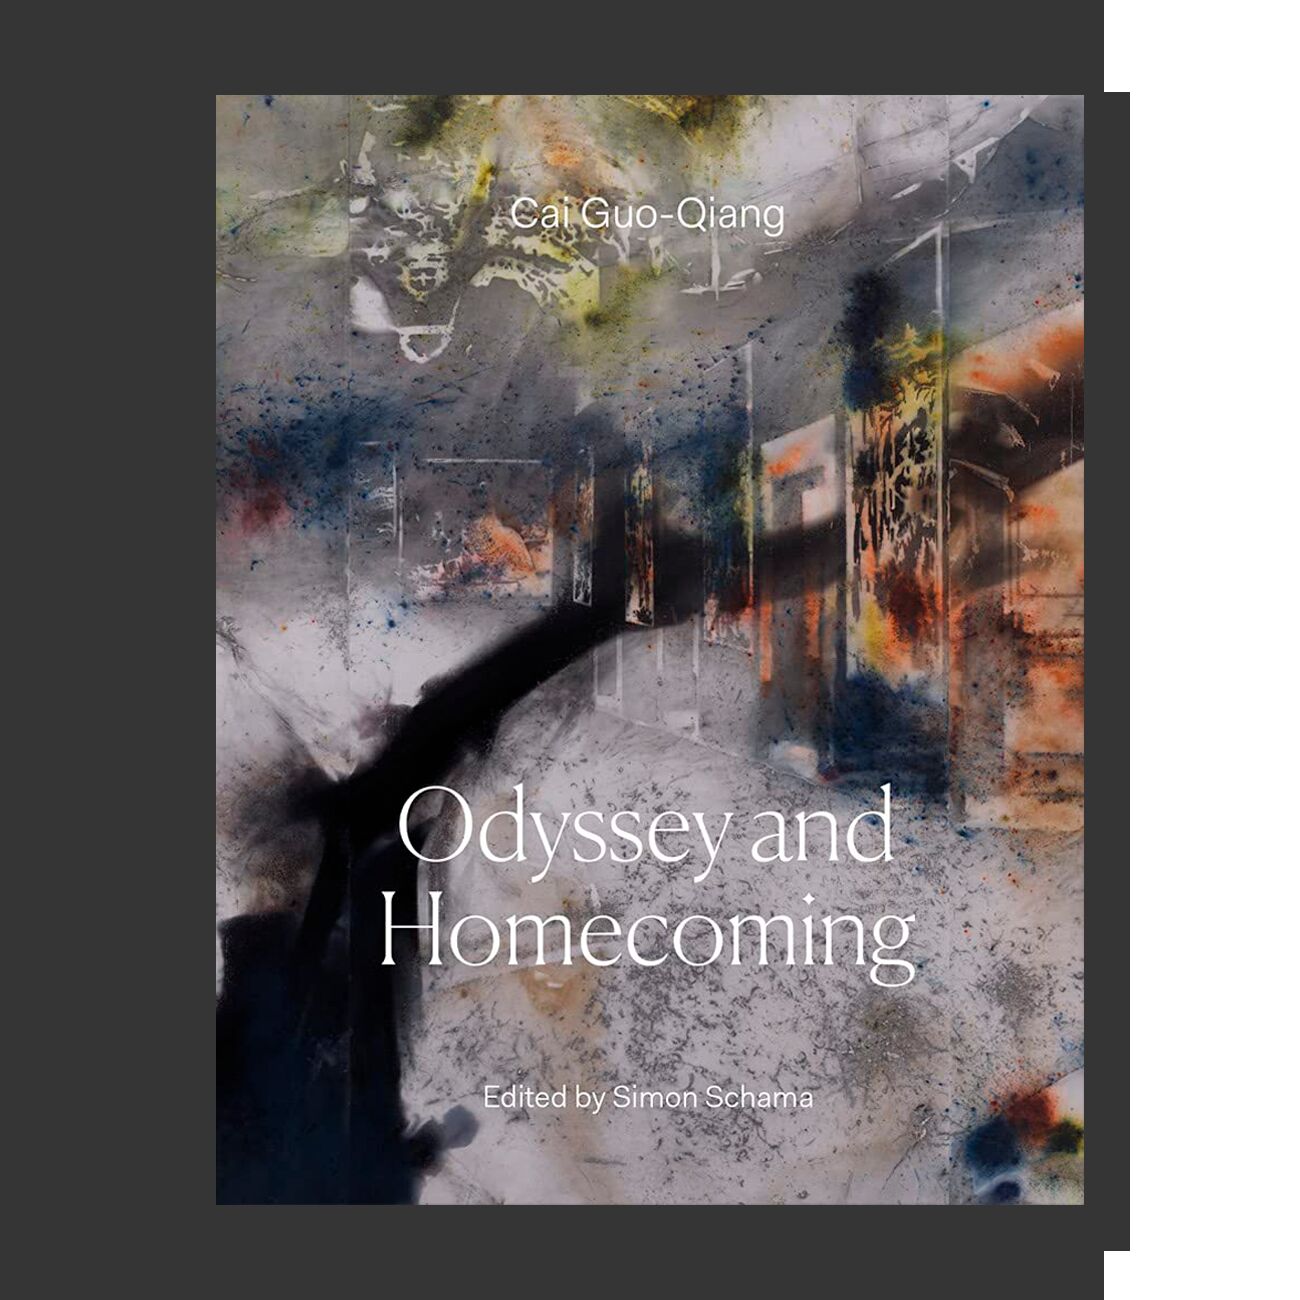 Cai Guo-Qiang: Odyssey and Homecoming